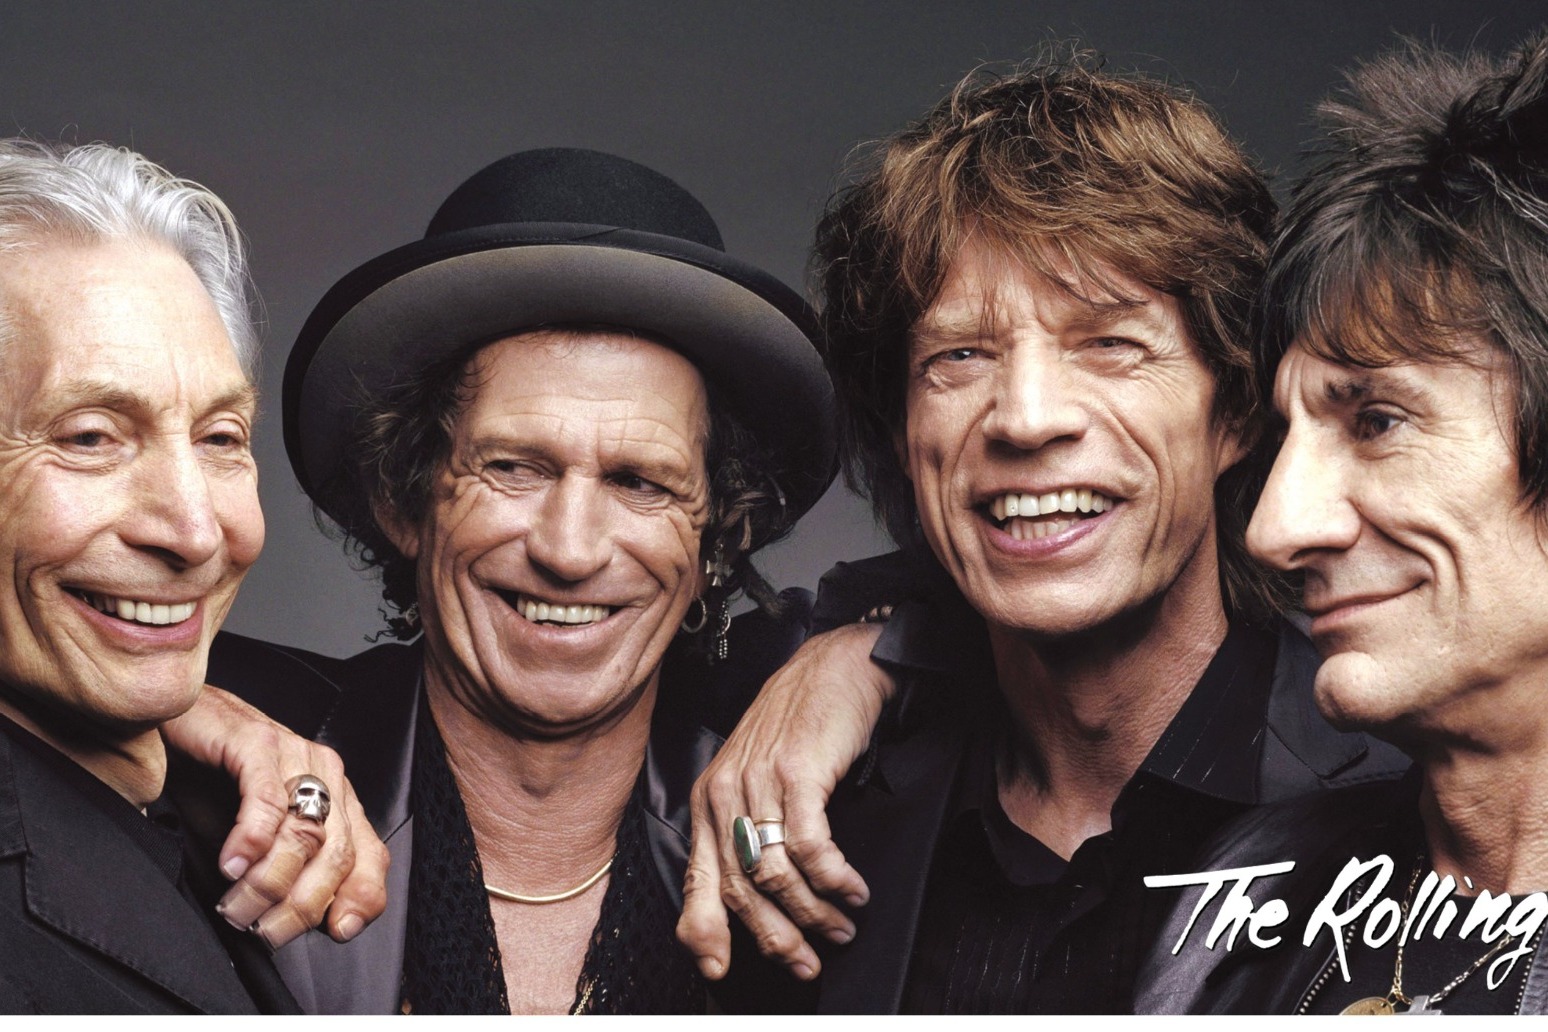 Keith Richards says Rolling Stones hiatus was necessary and made him stronger